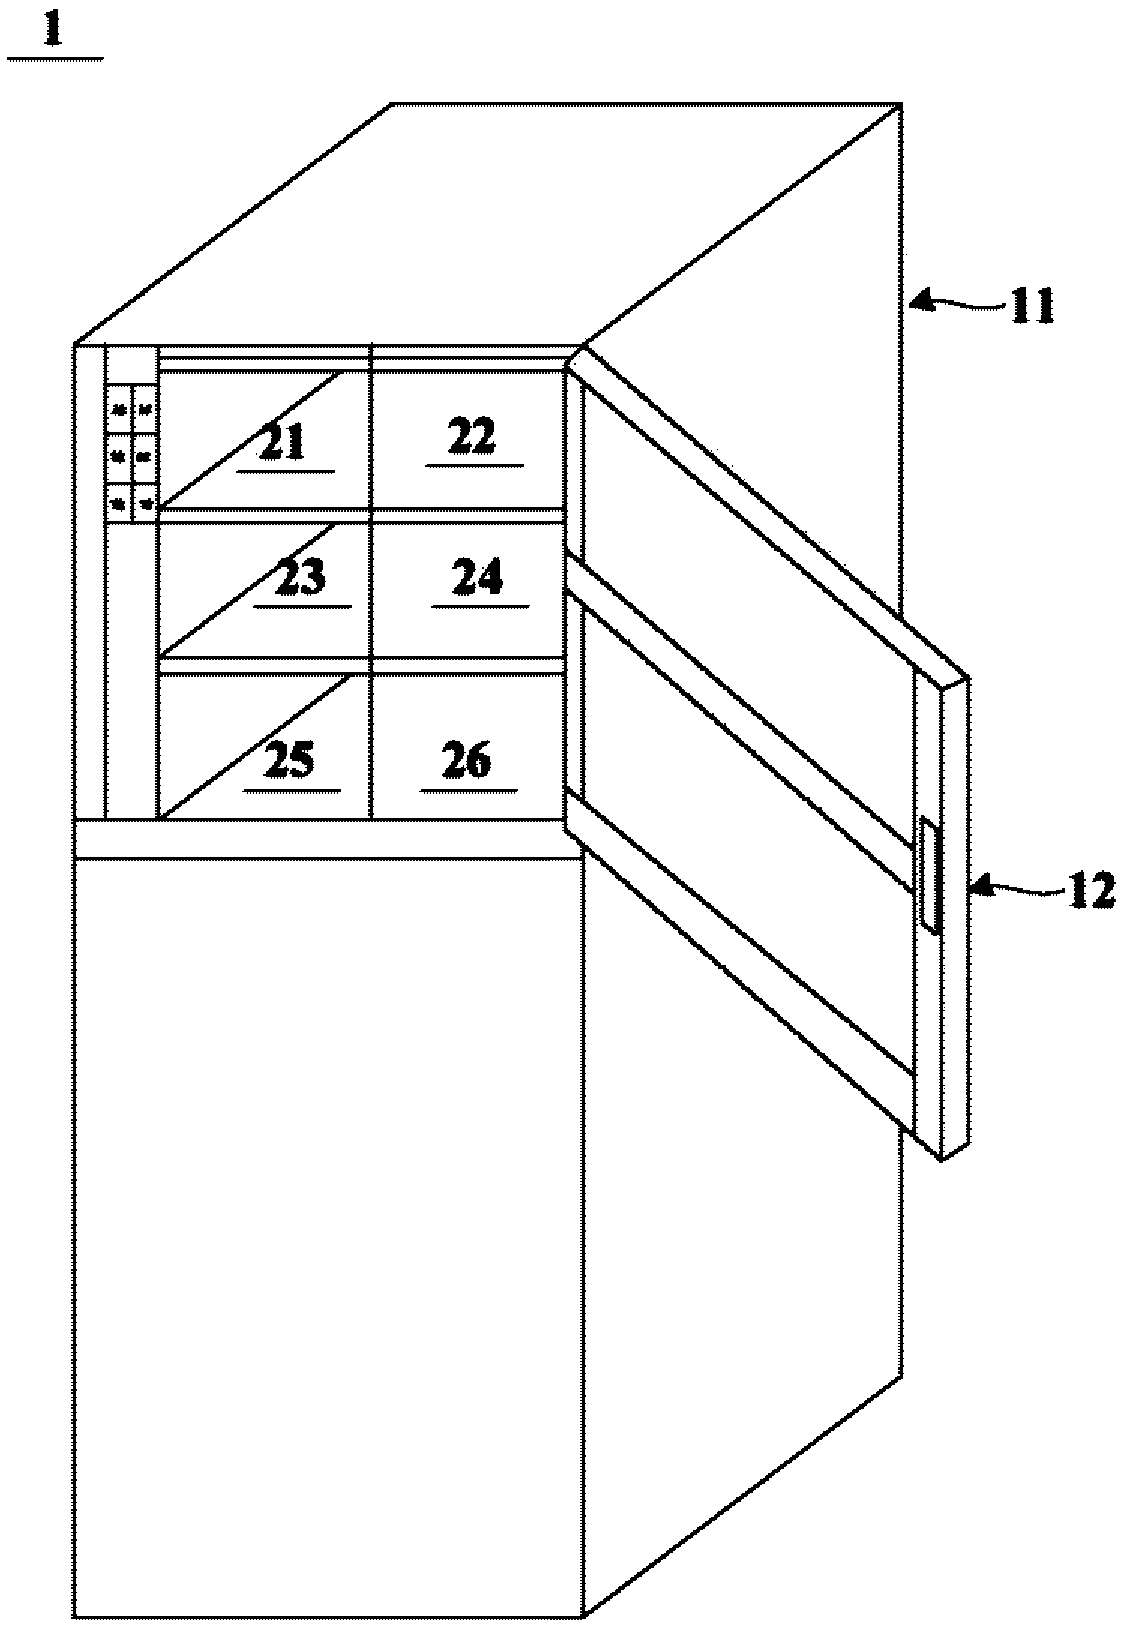 Food material management method and system of refrigerator for blind persons